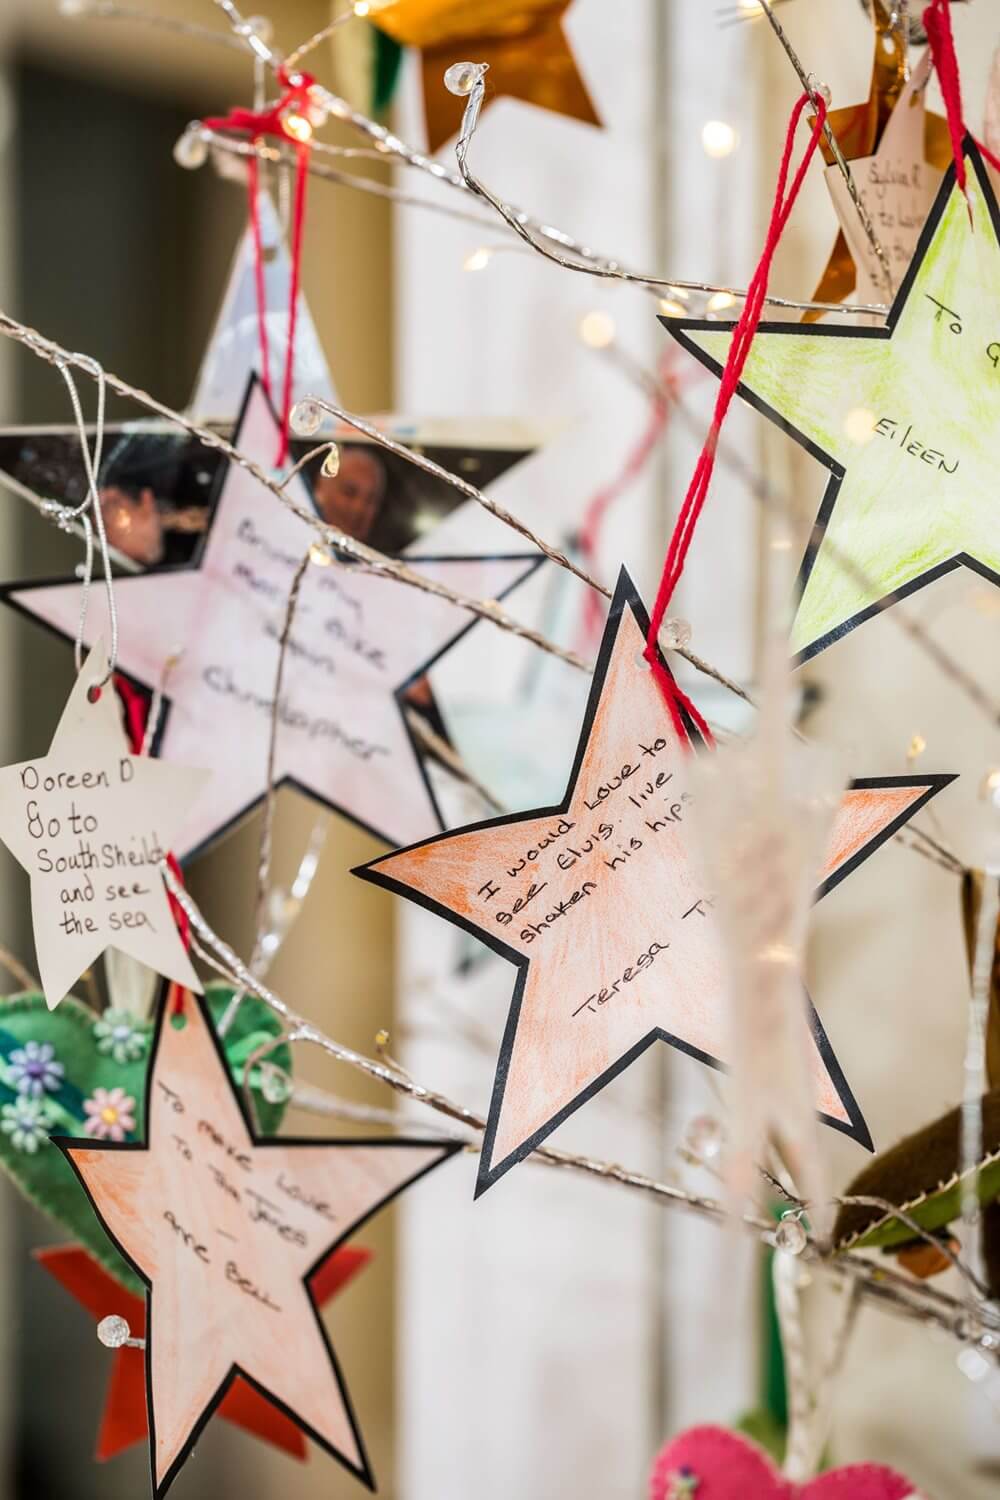 Senior Care Assistant - Armstrong House wishing tree